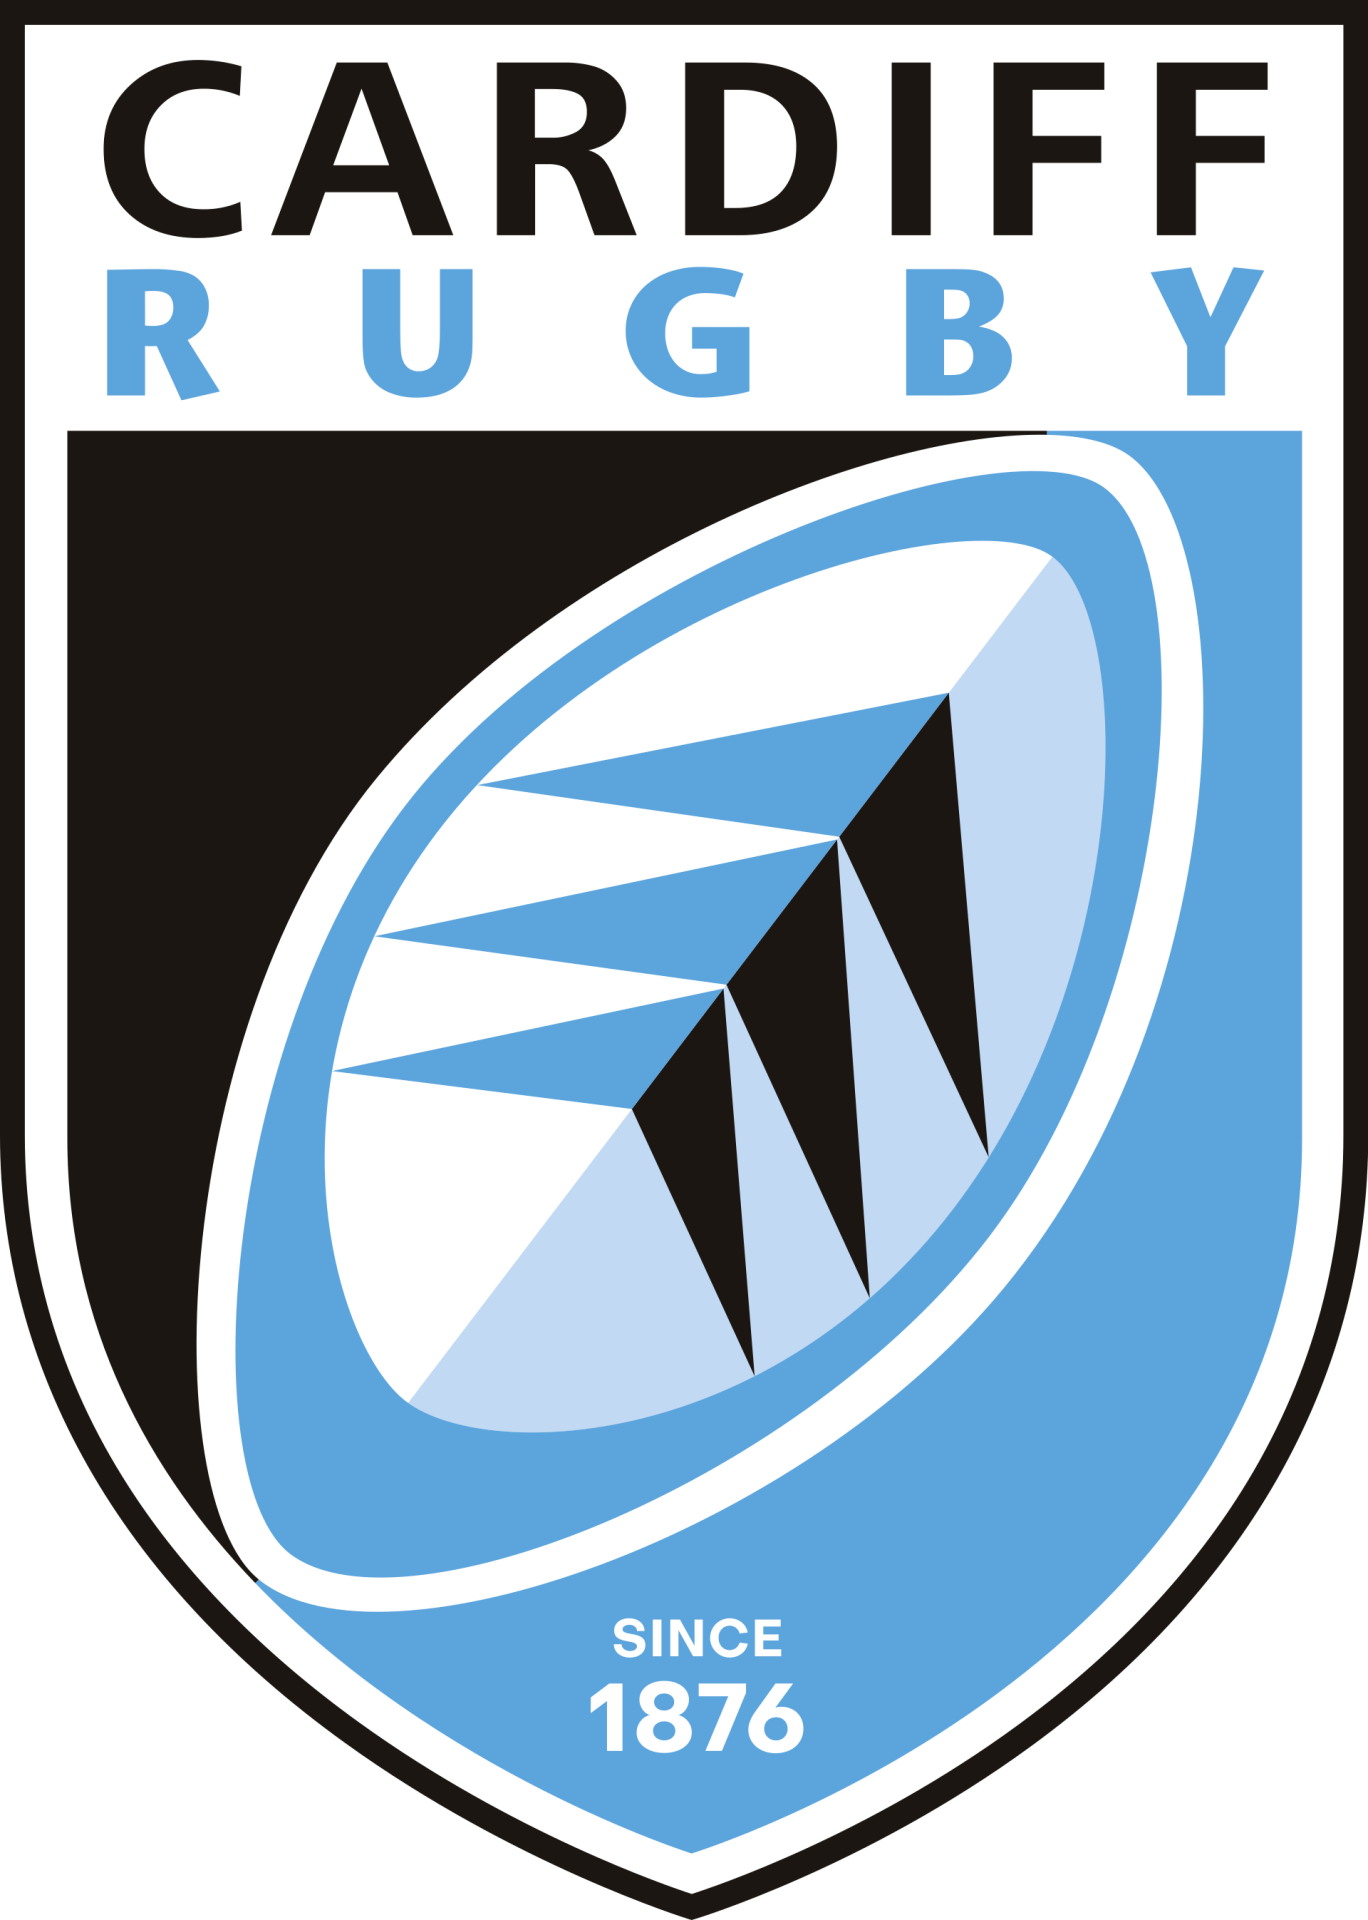 Cardiff rugby